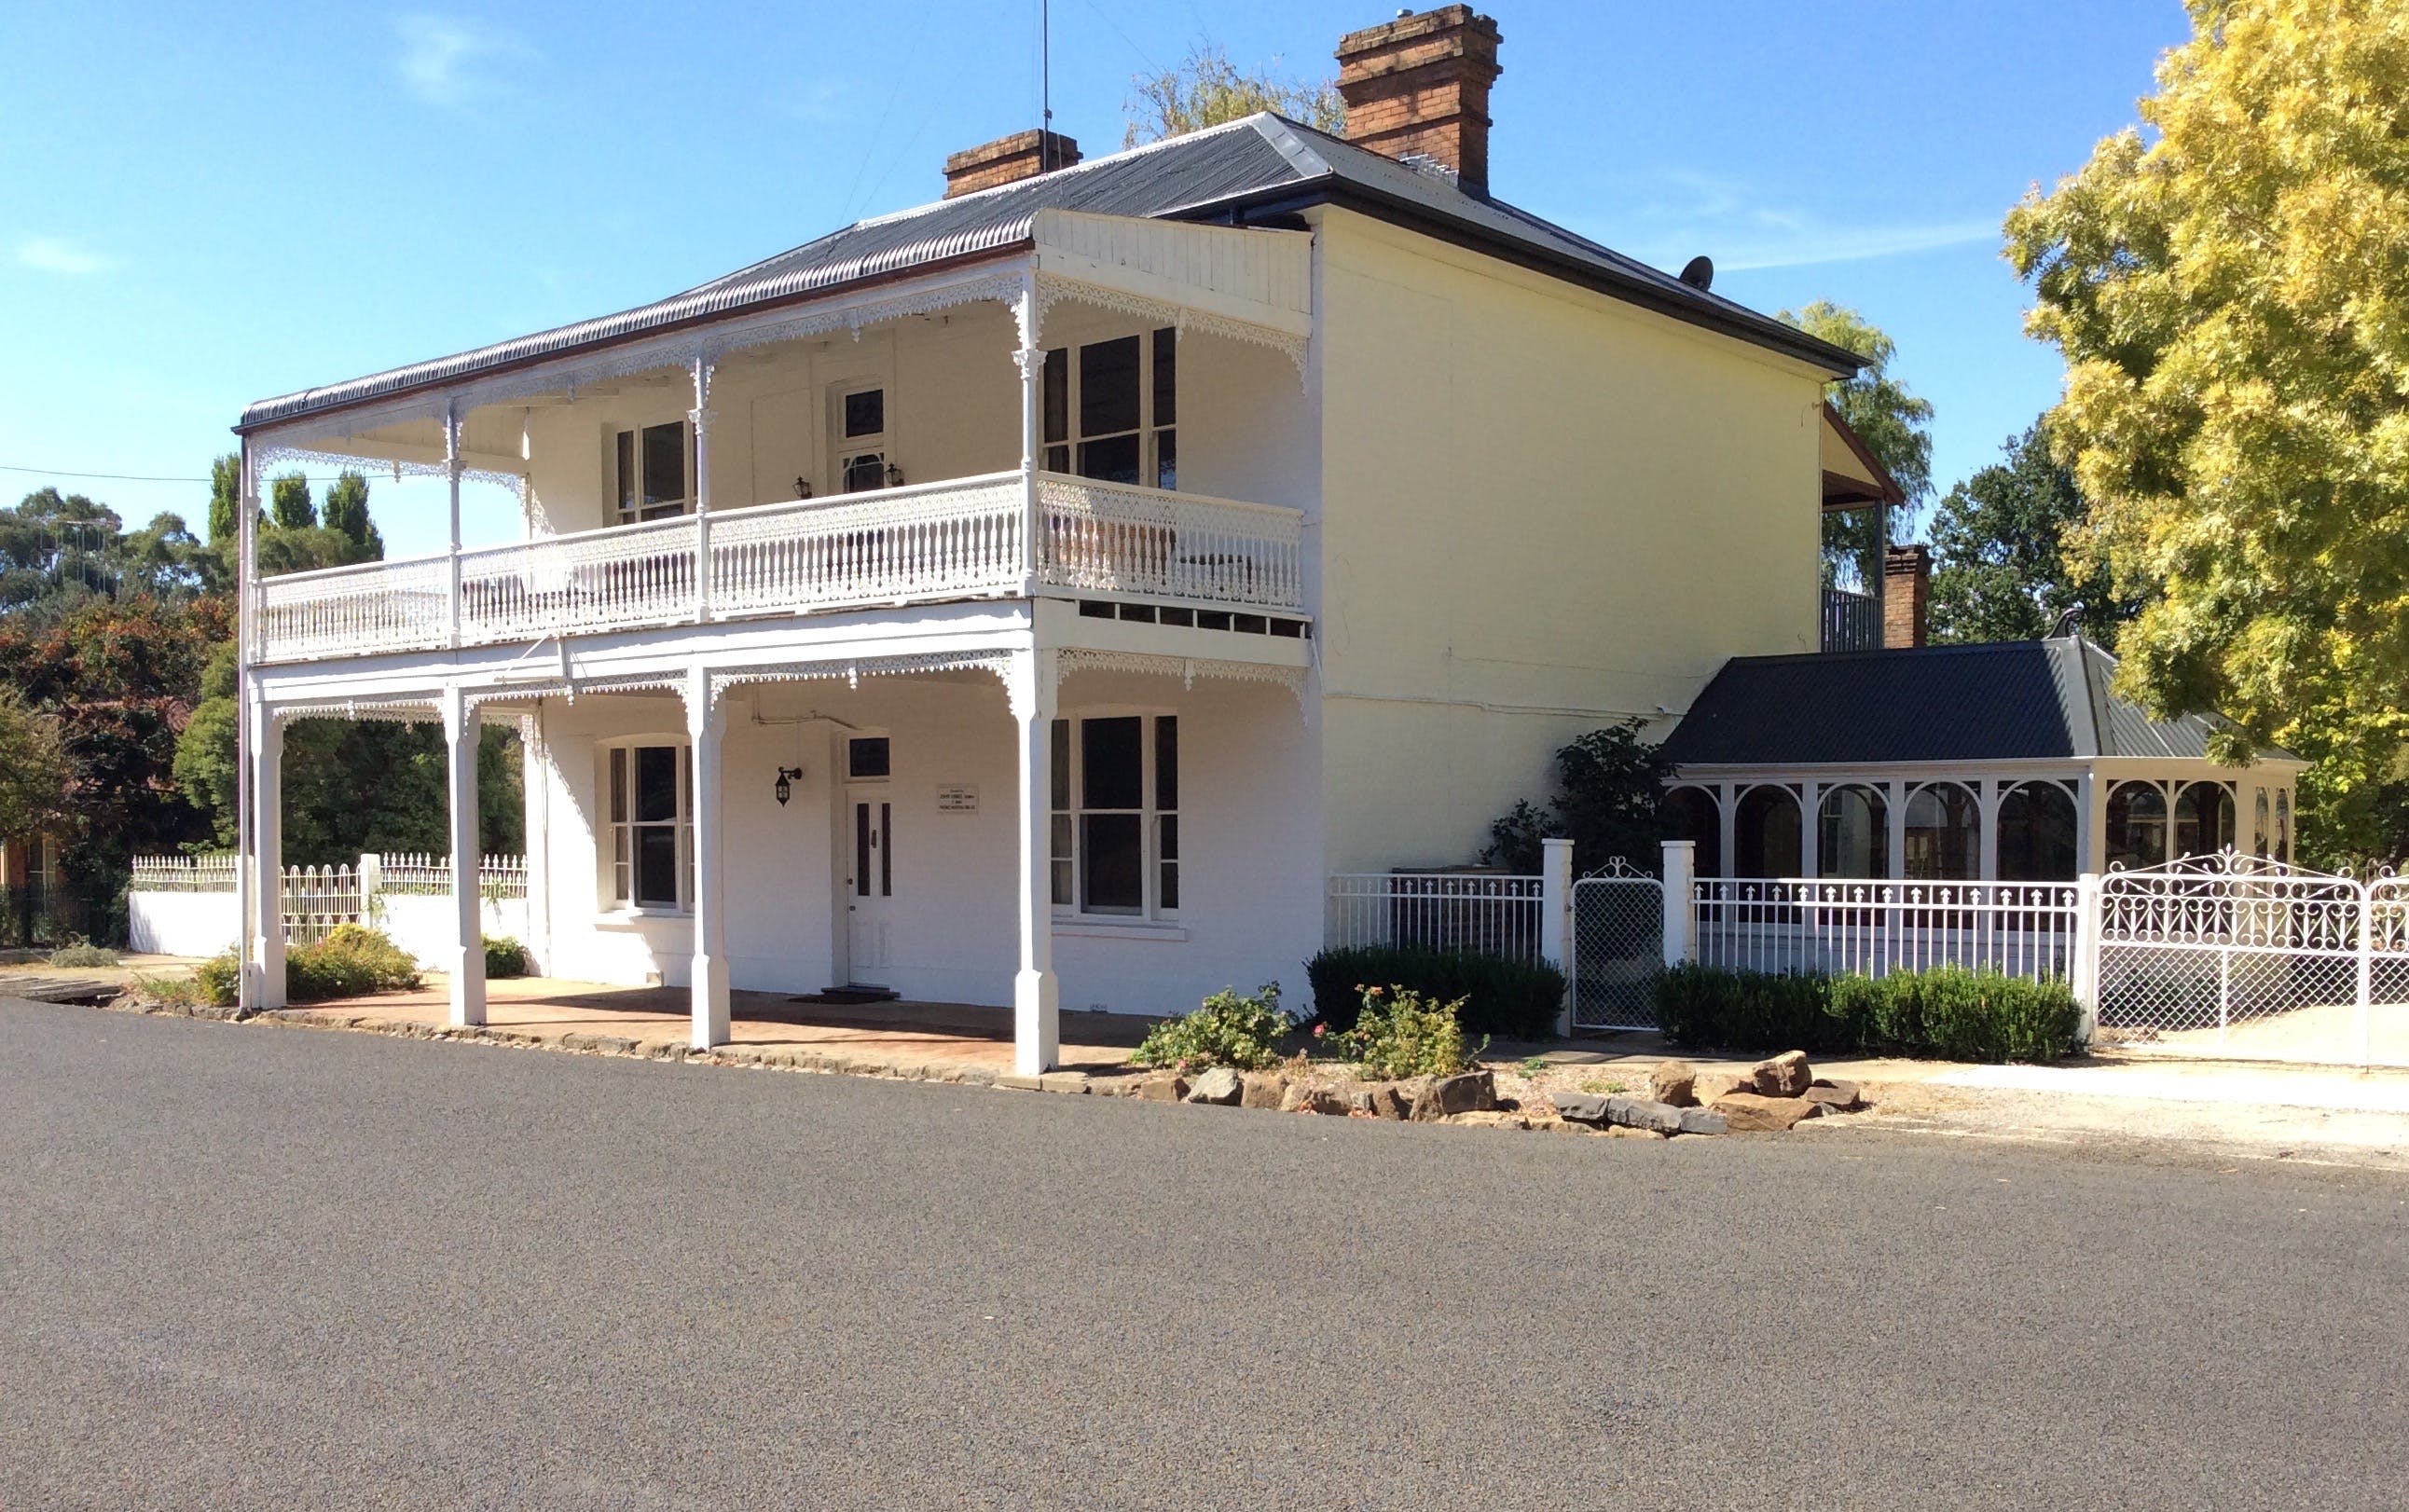 The White House Carcoar - Perisher Accommodation